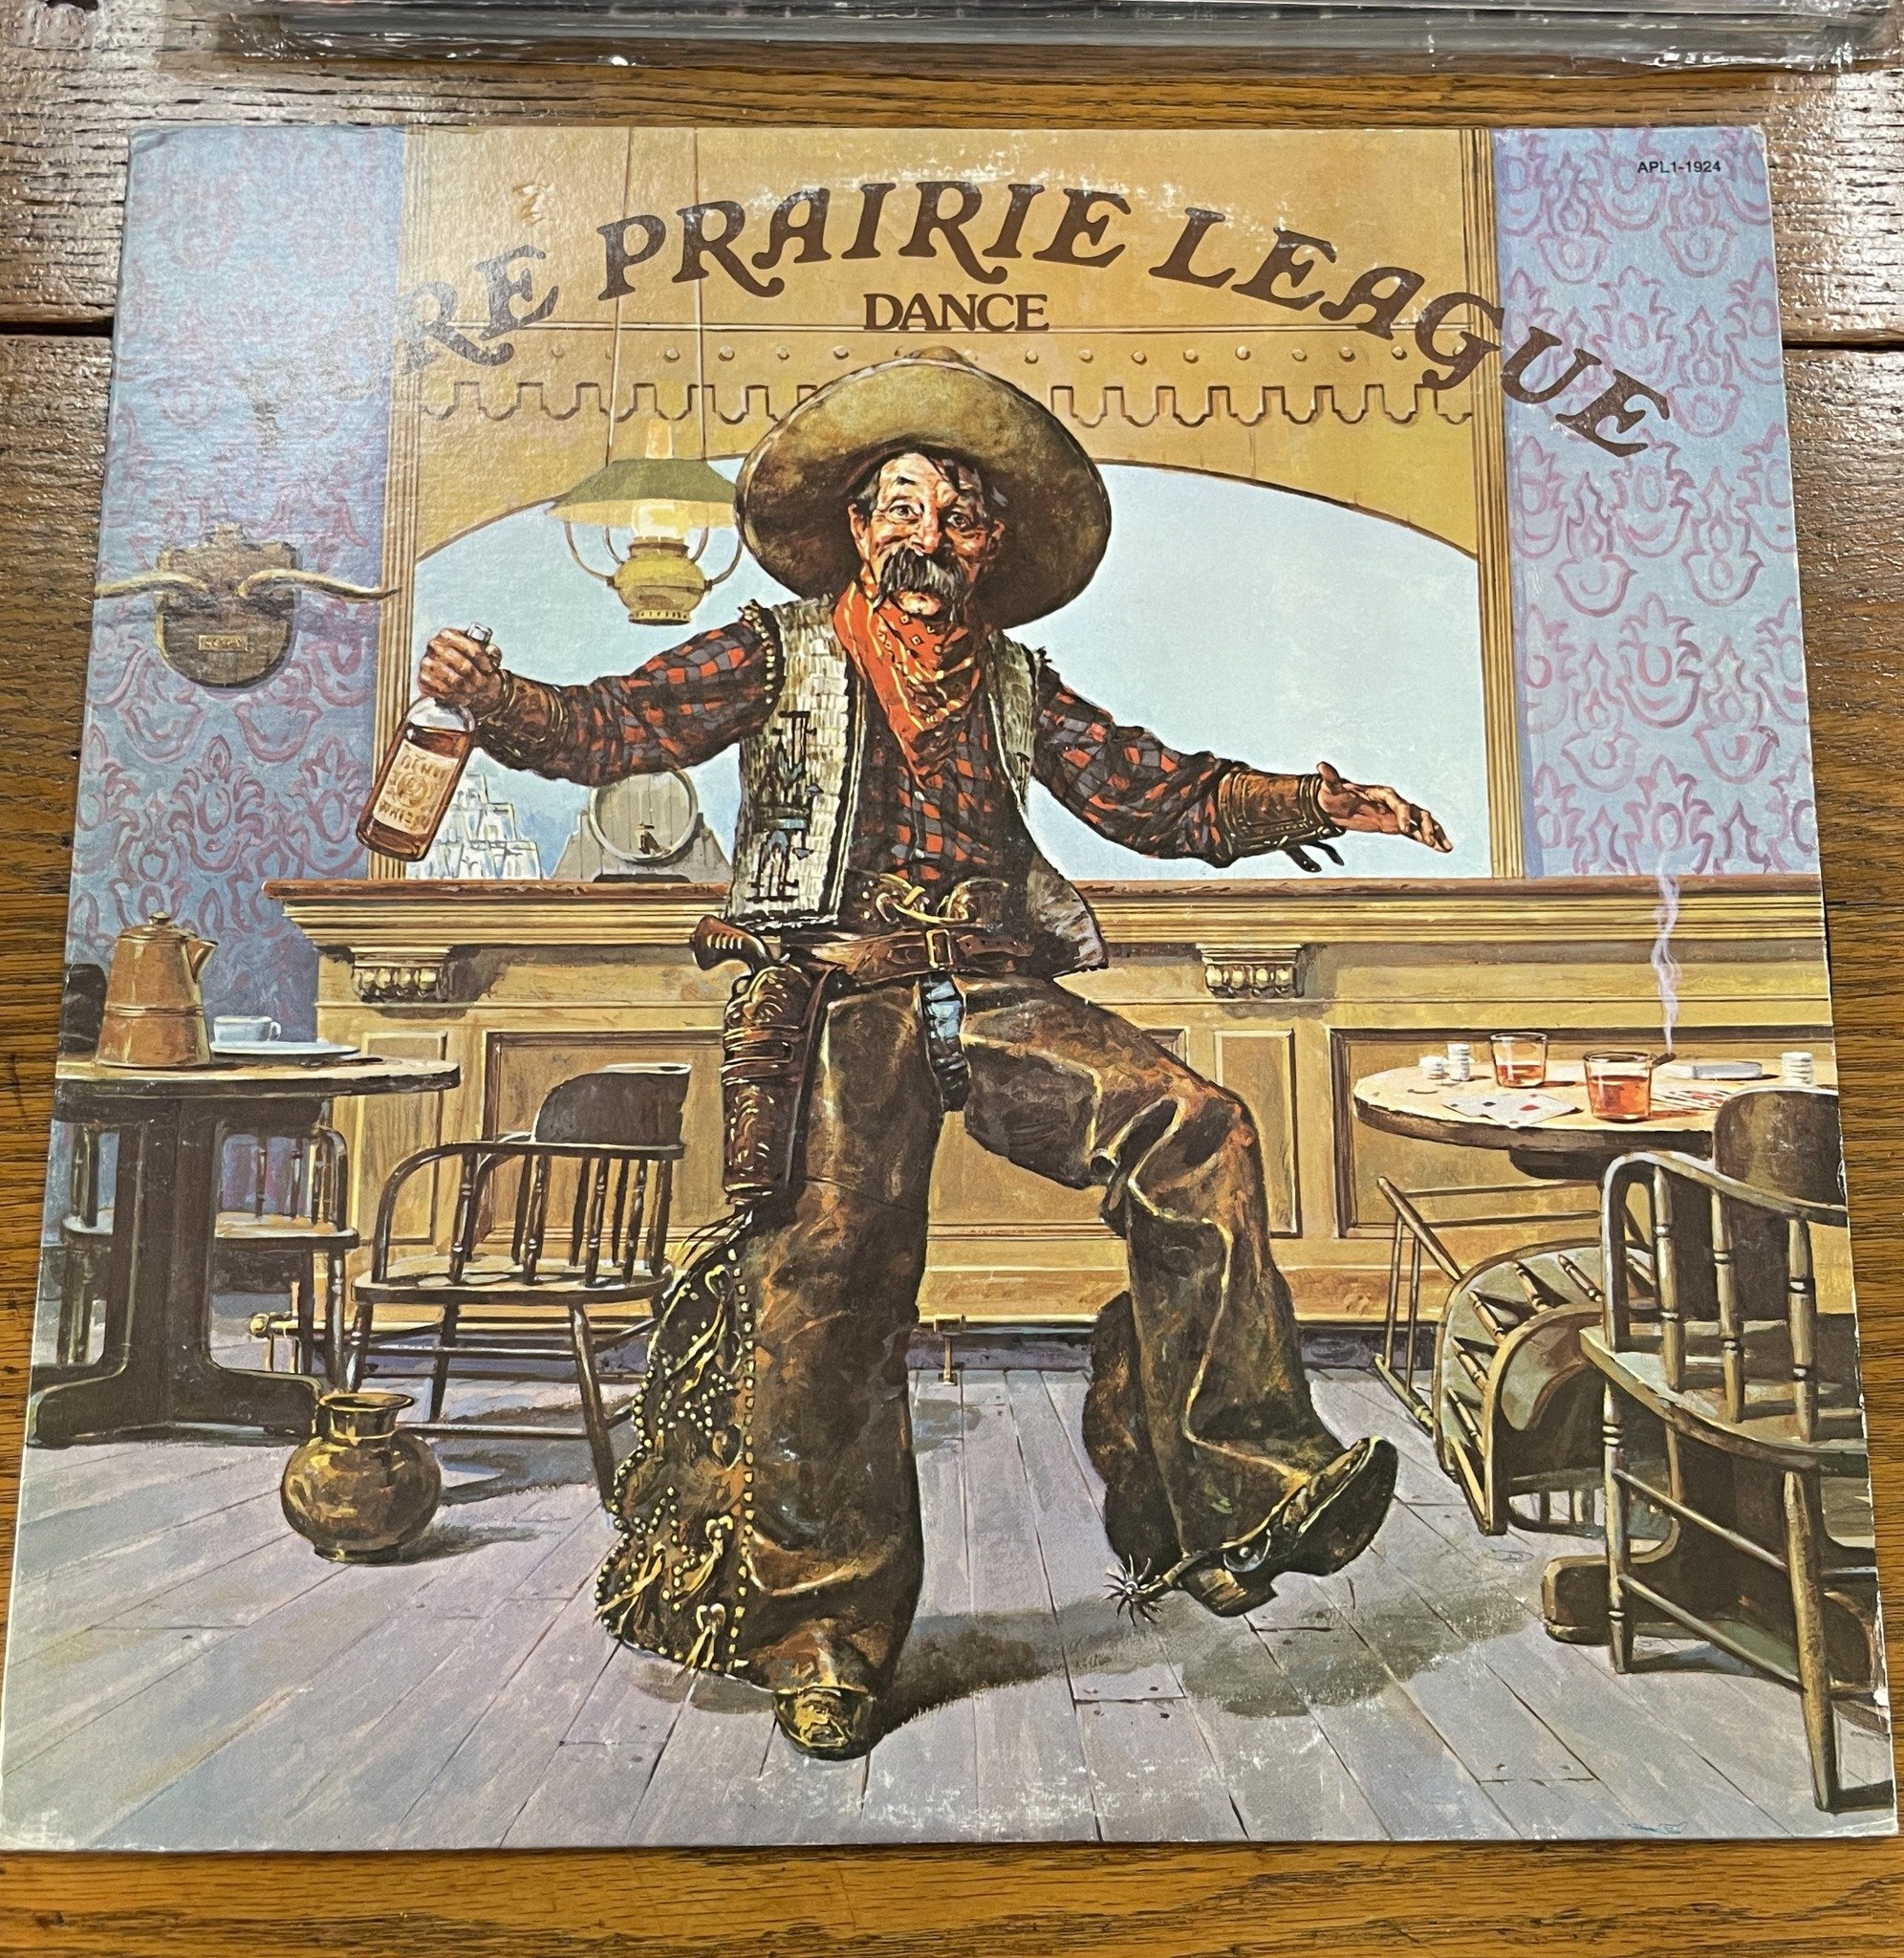 #musicmonday Pure Prairie League!  Who remembers this one? #heretodaymaybetomorrowmaybenot #antiques #decorandmore #vintage #rocantiques #roc #cdga #OMA #ontariomallantiques #vintageliving #vintage #collectibles #vintageny #antiquesnewyork
#rocantiqu